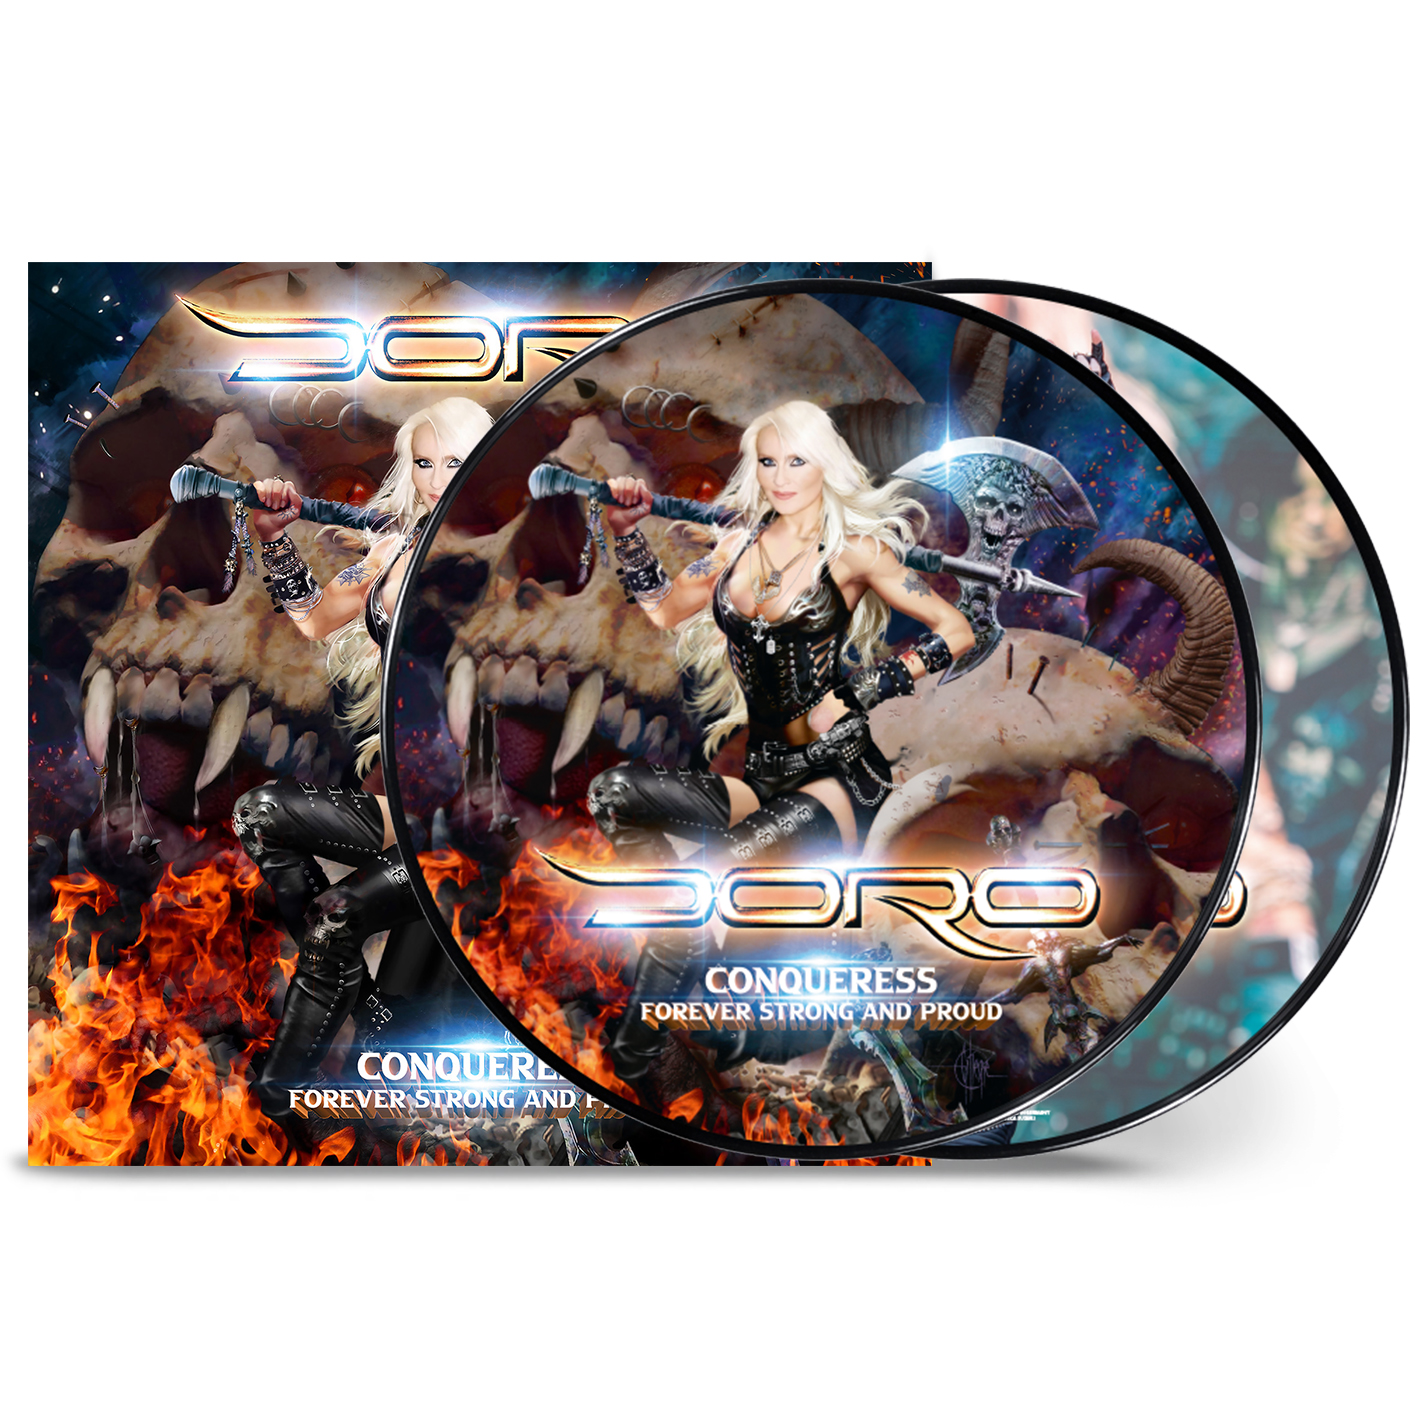 Doro - Conqueress - Forever - (Vinyl) Proud Strong and